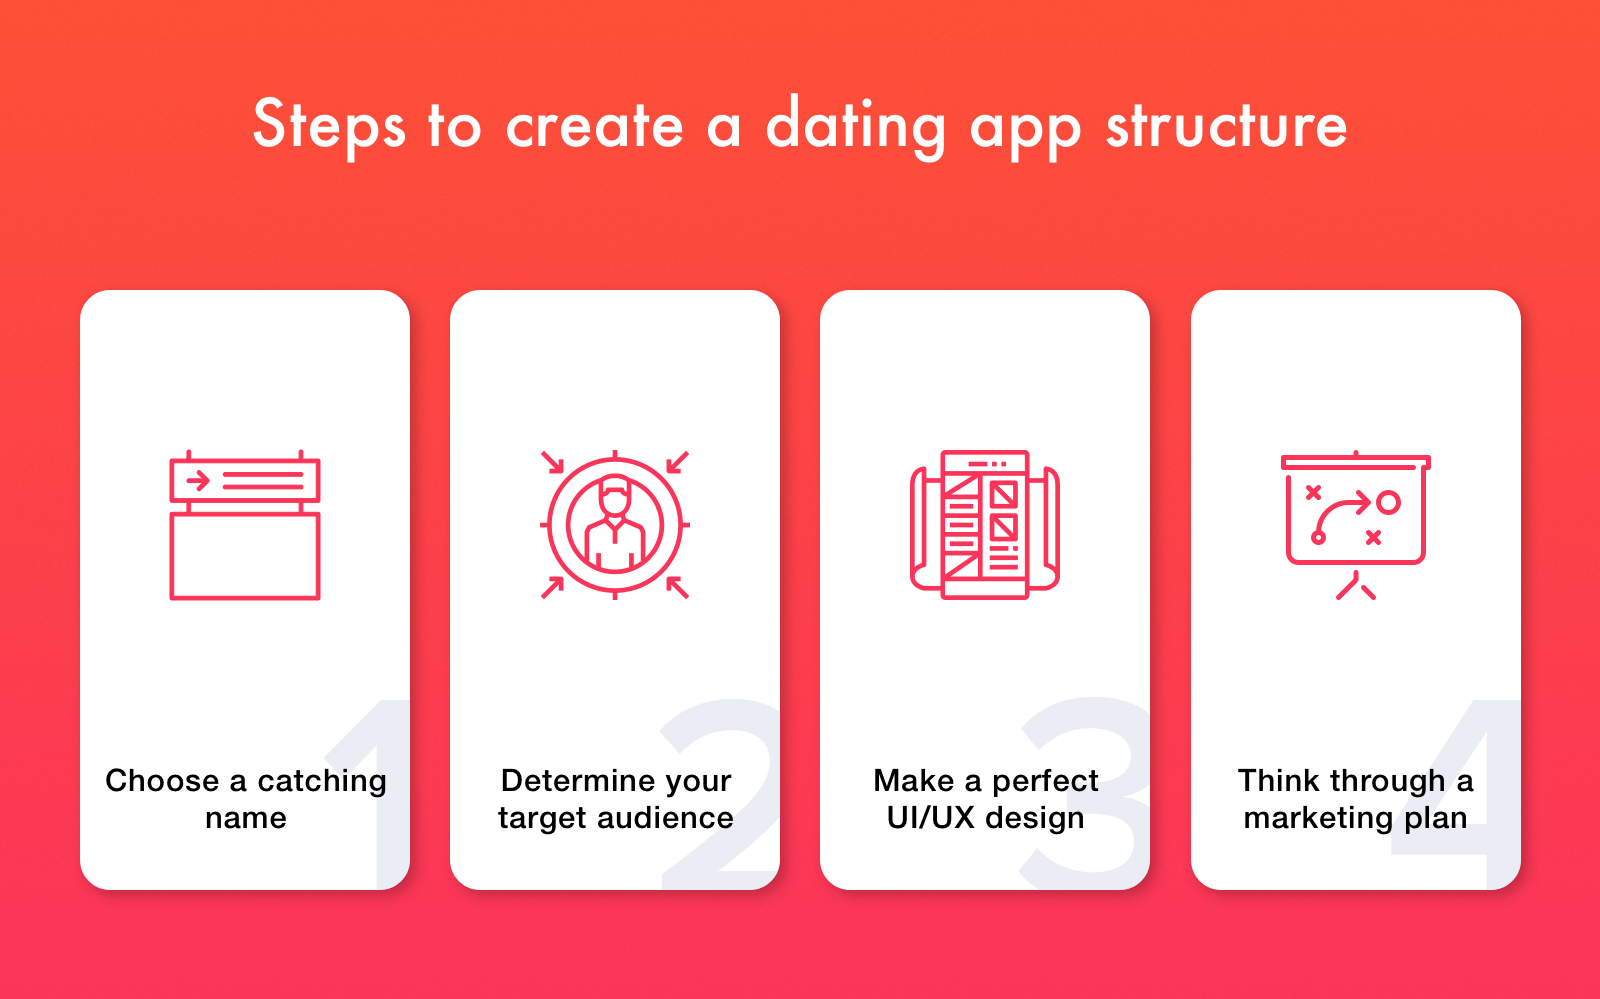 How is cheekd dating app different from other dating apps?